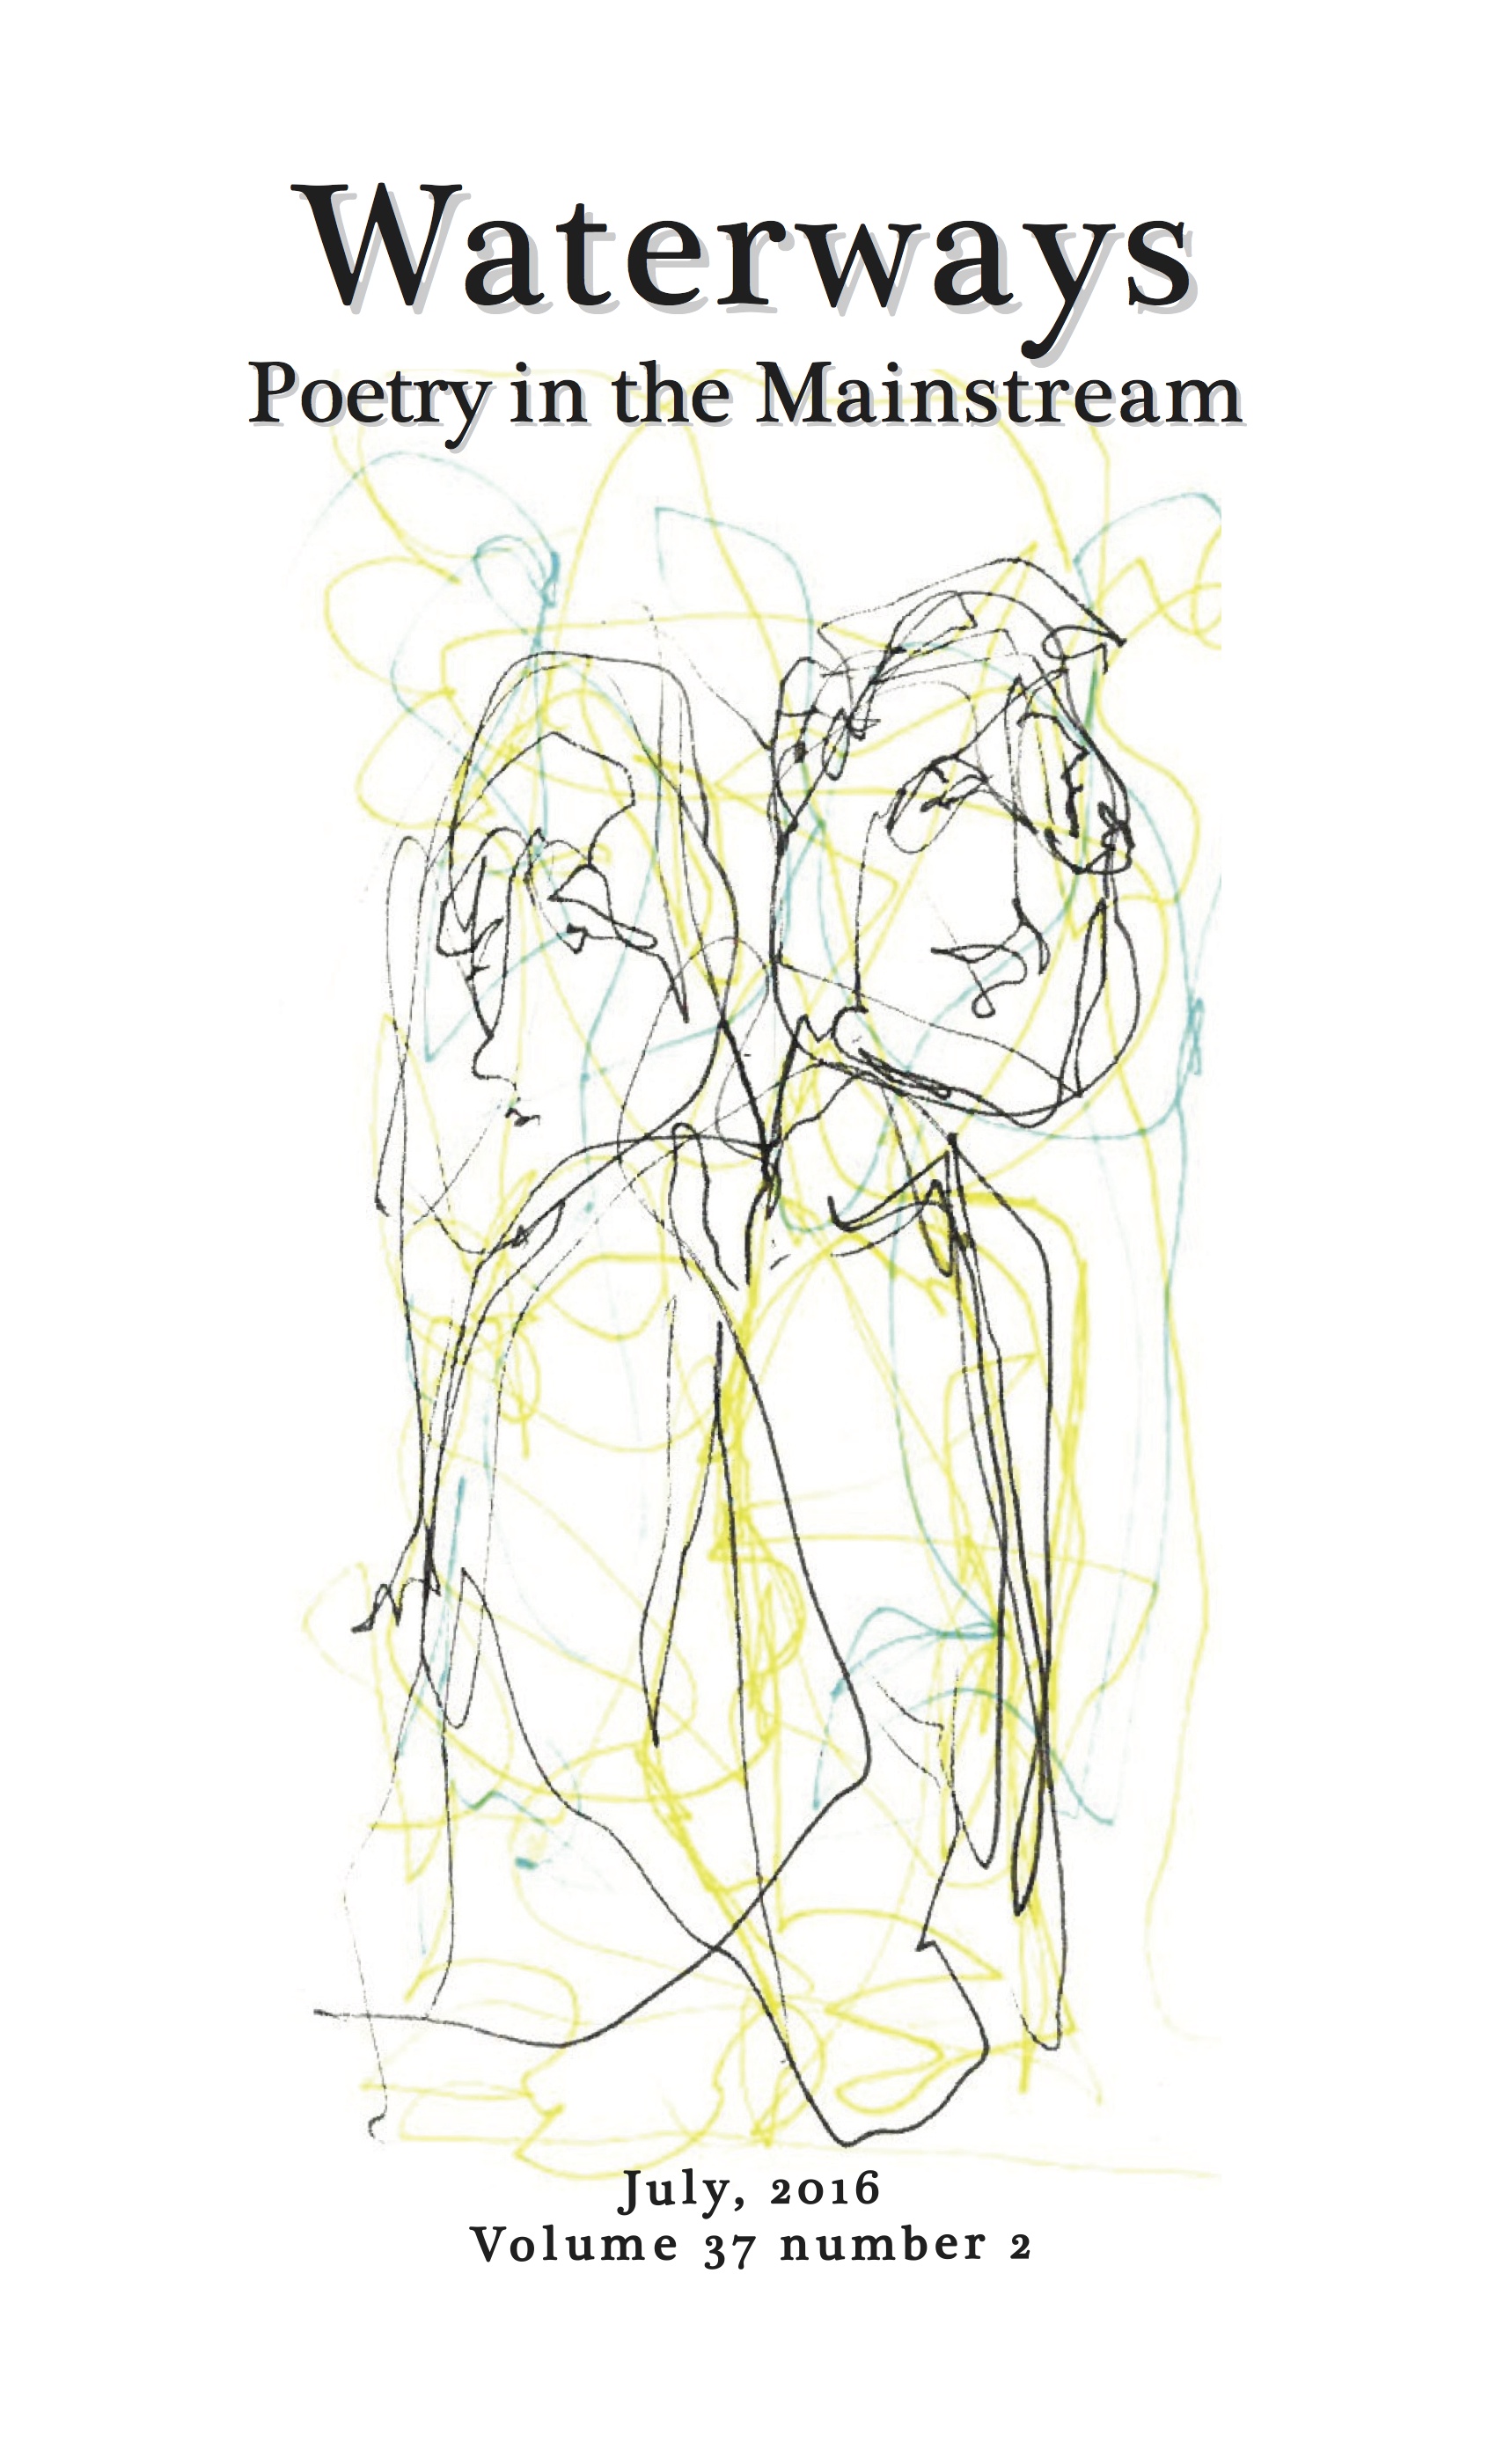 Richard Spiegel's sketch of couple for cover of Waterways: Poetry in the Mainstream